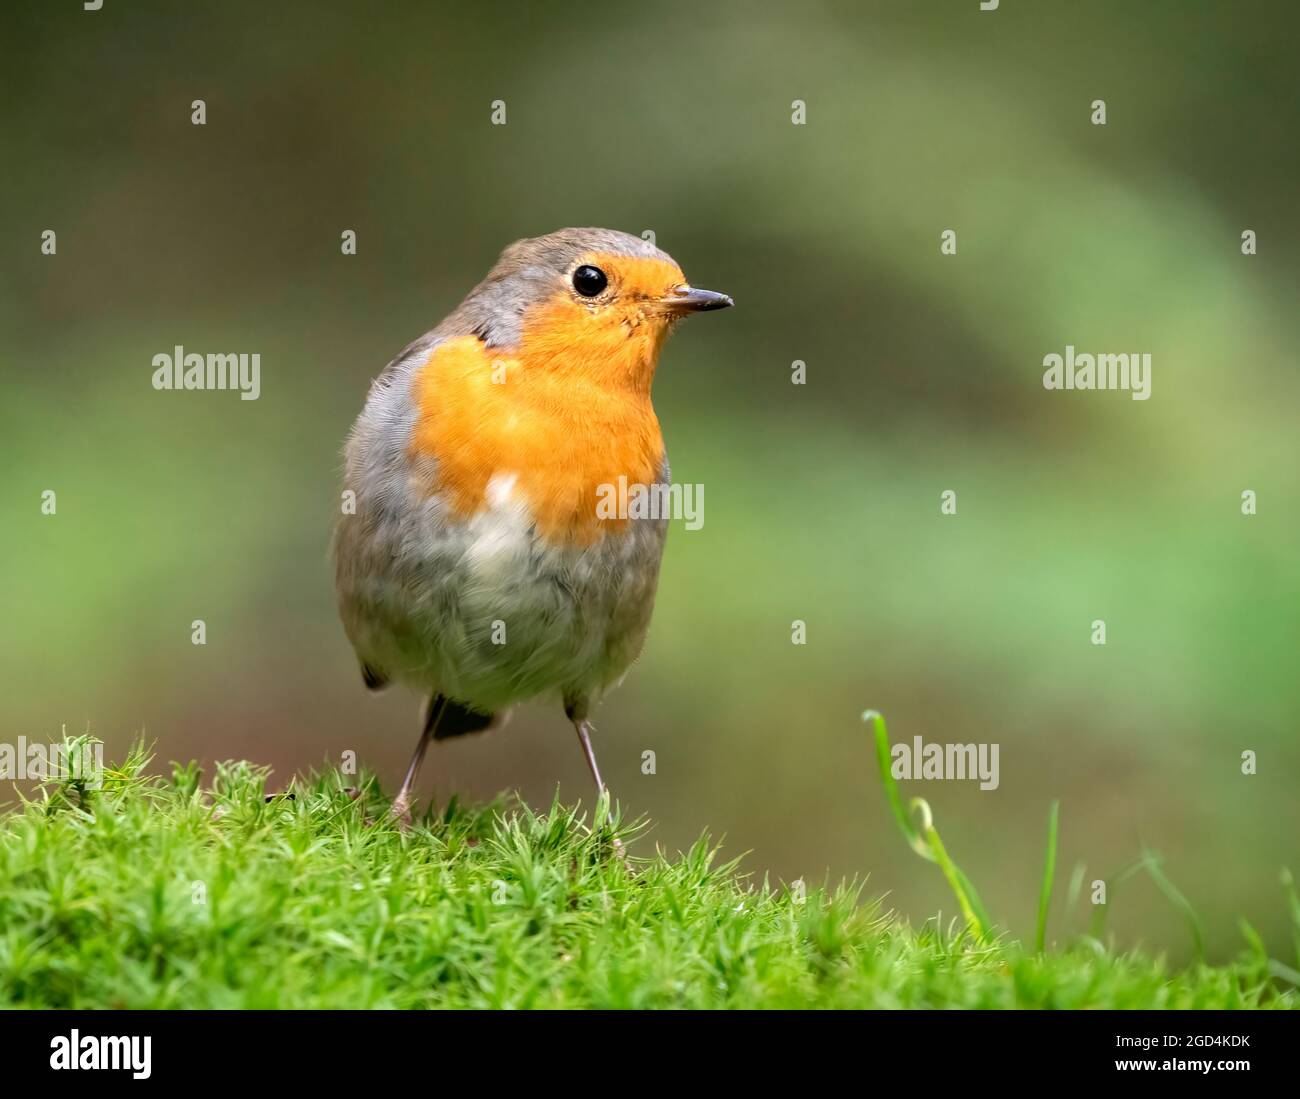 European Robin (Erithacus rubecula), seen from the front, adult perched on the floor Stock Photo